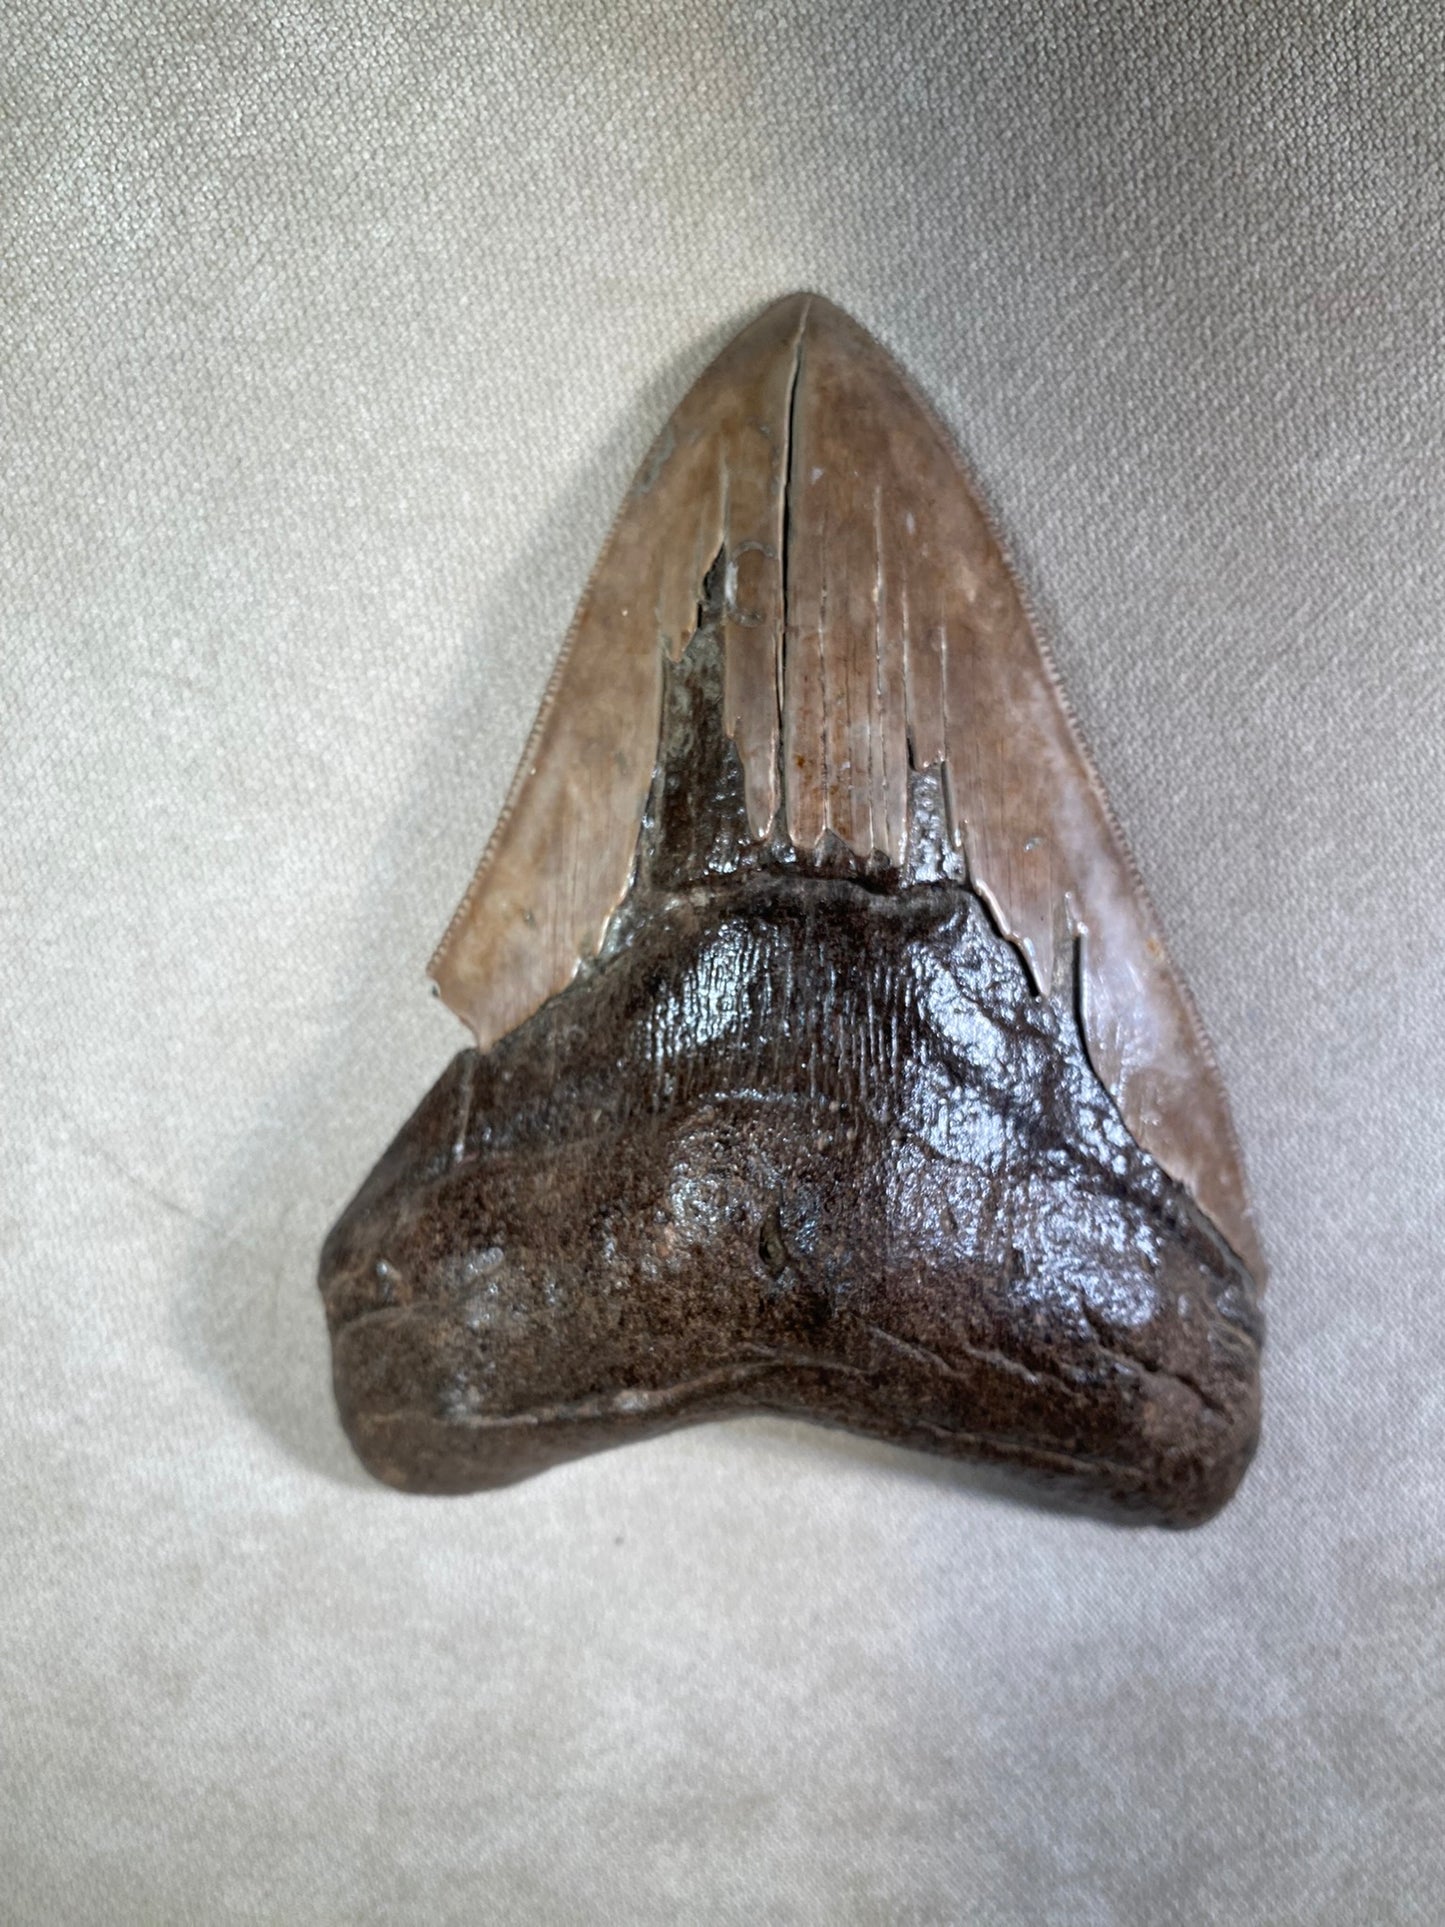 5" Megalodon fossil shark tooth